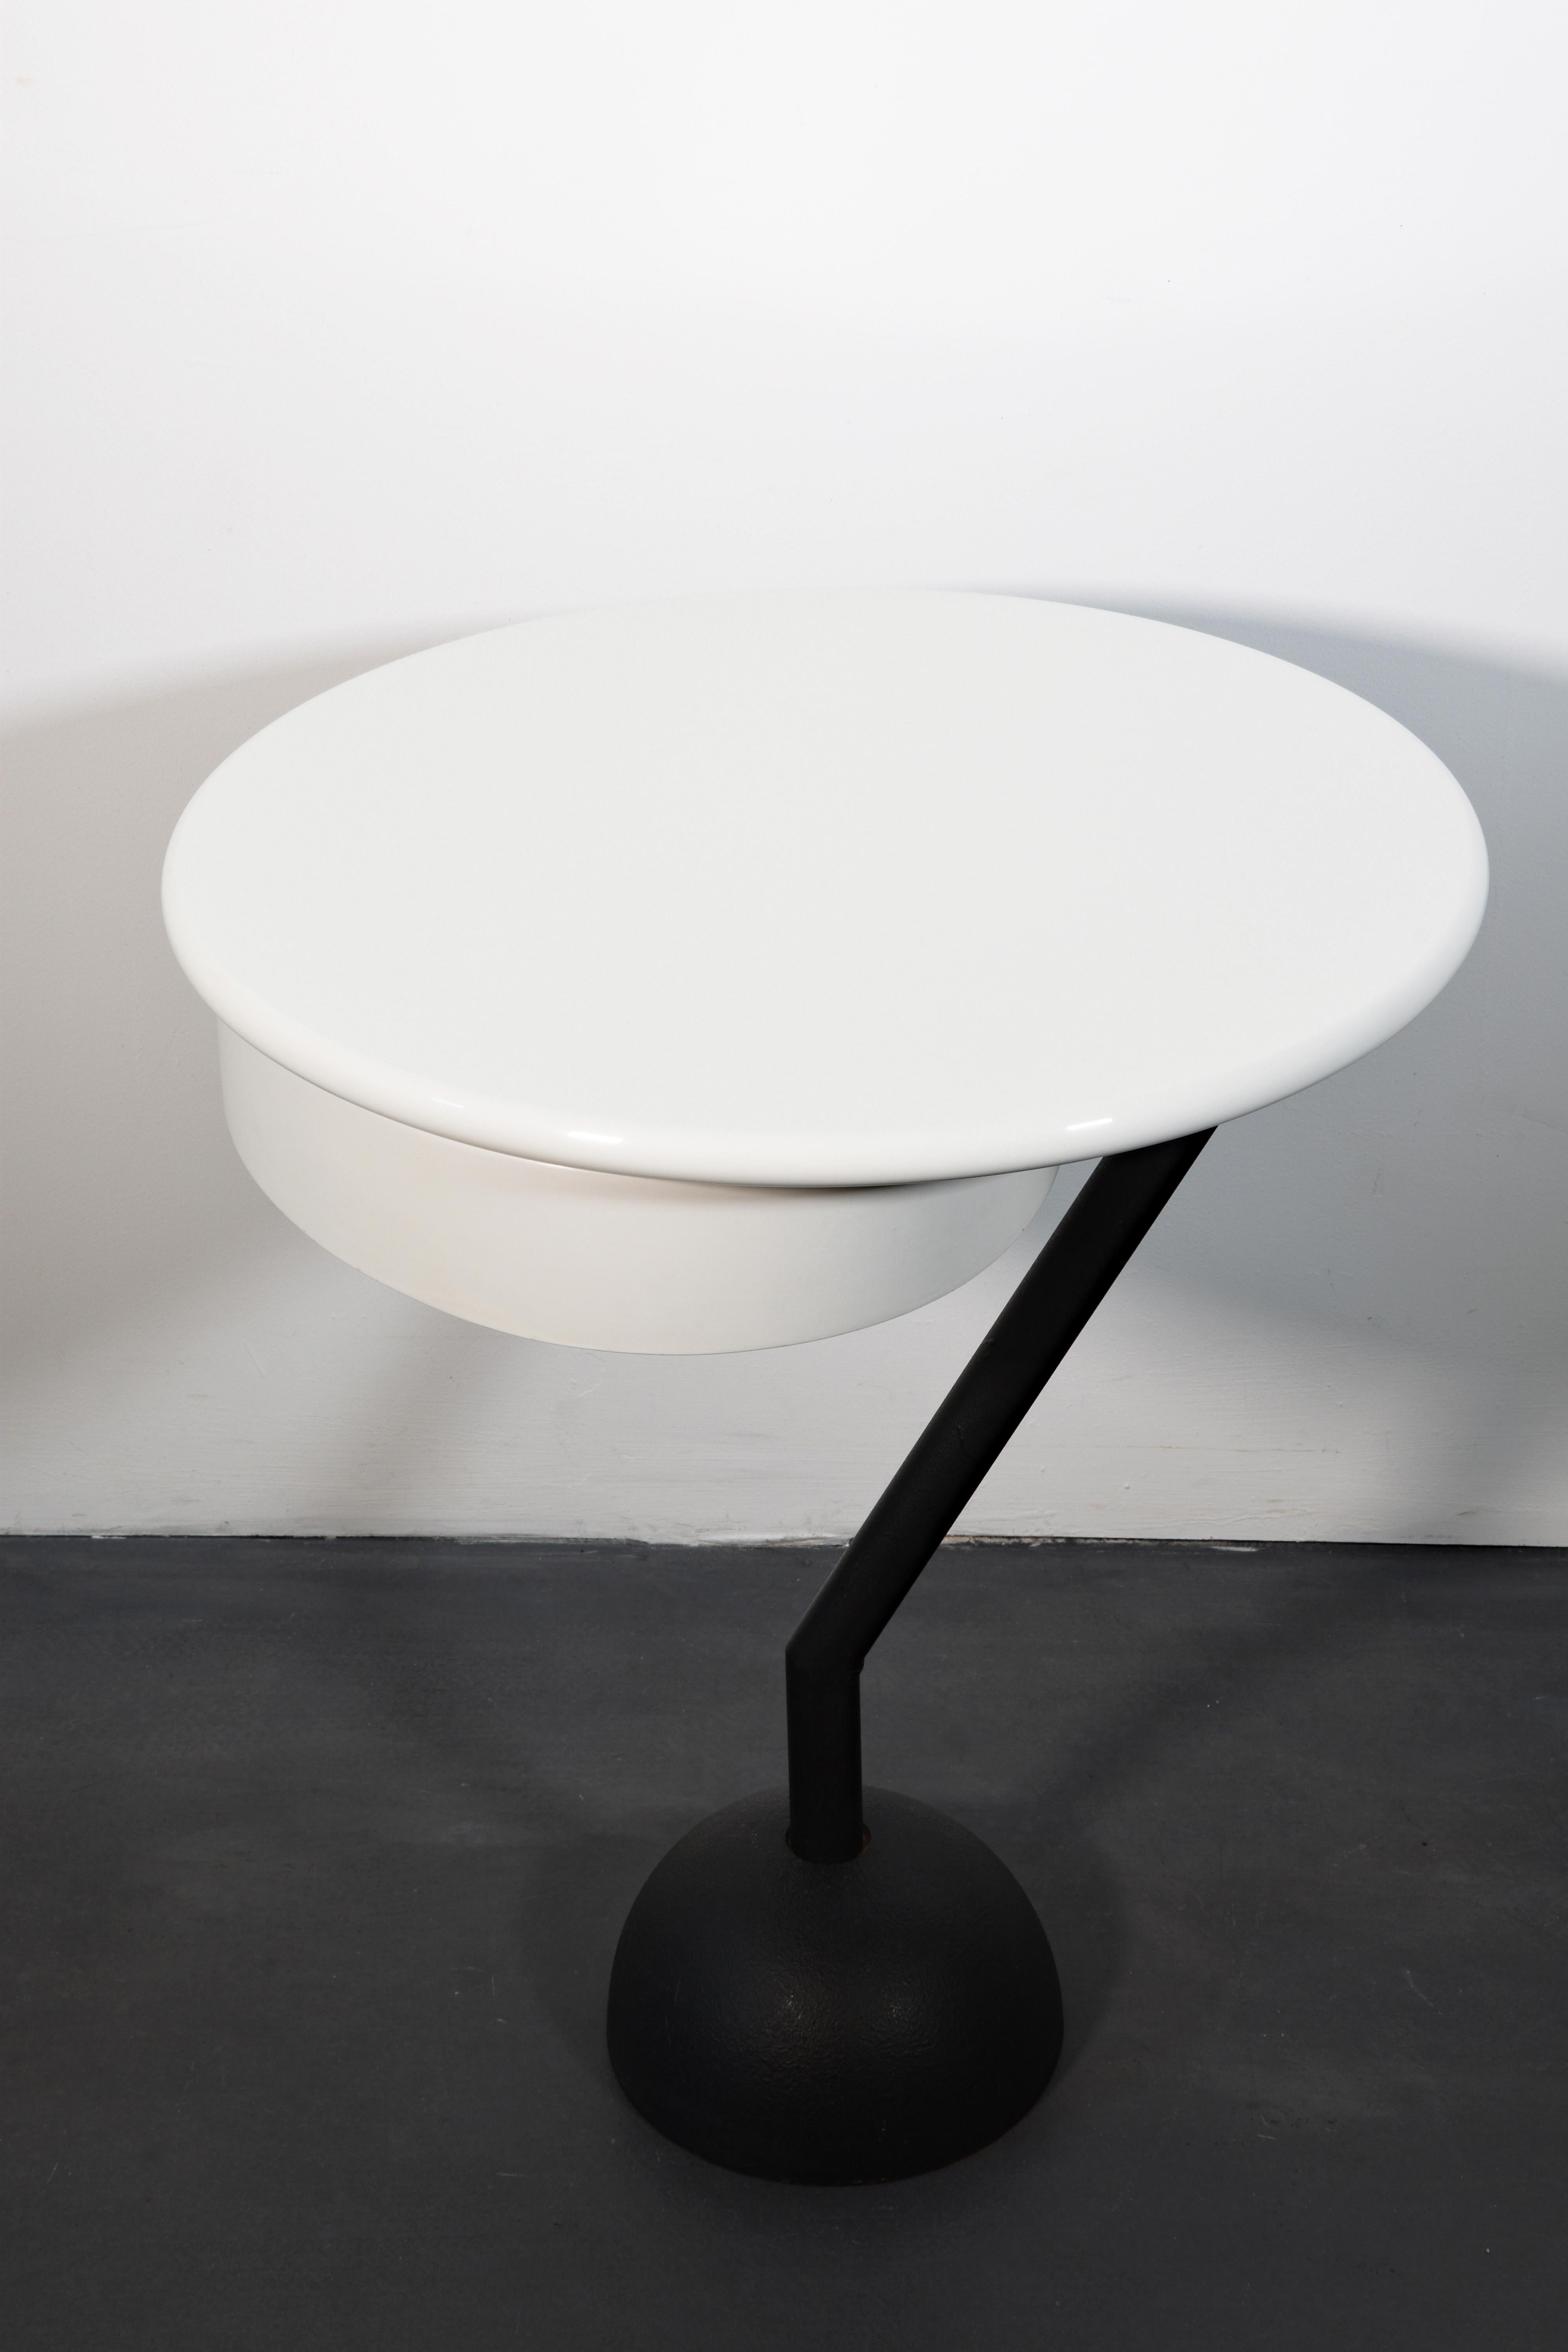 Side table, Memphis, Valerio Mazzei, 1983, Italy. White lacquered.
This table was produced only in small numbers in 1983 prior to the acquisition of Mazzei by Edra. 
This beautiful side table from the Memphis era is in an excellent condition.

